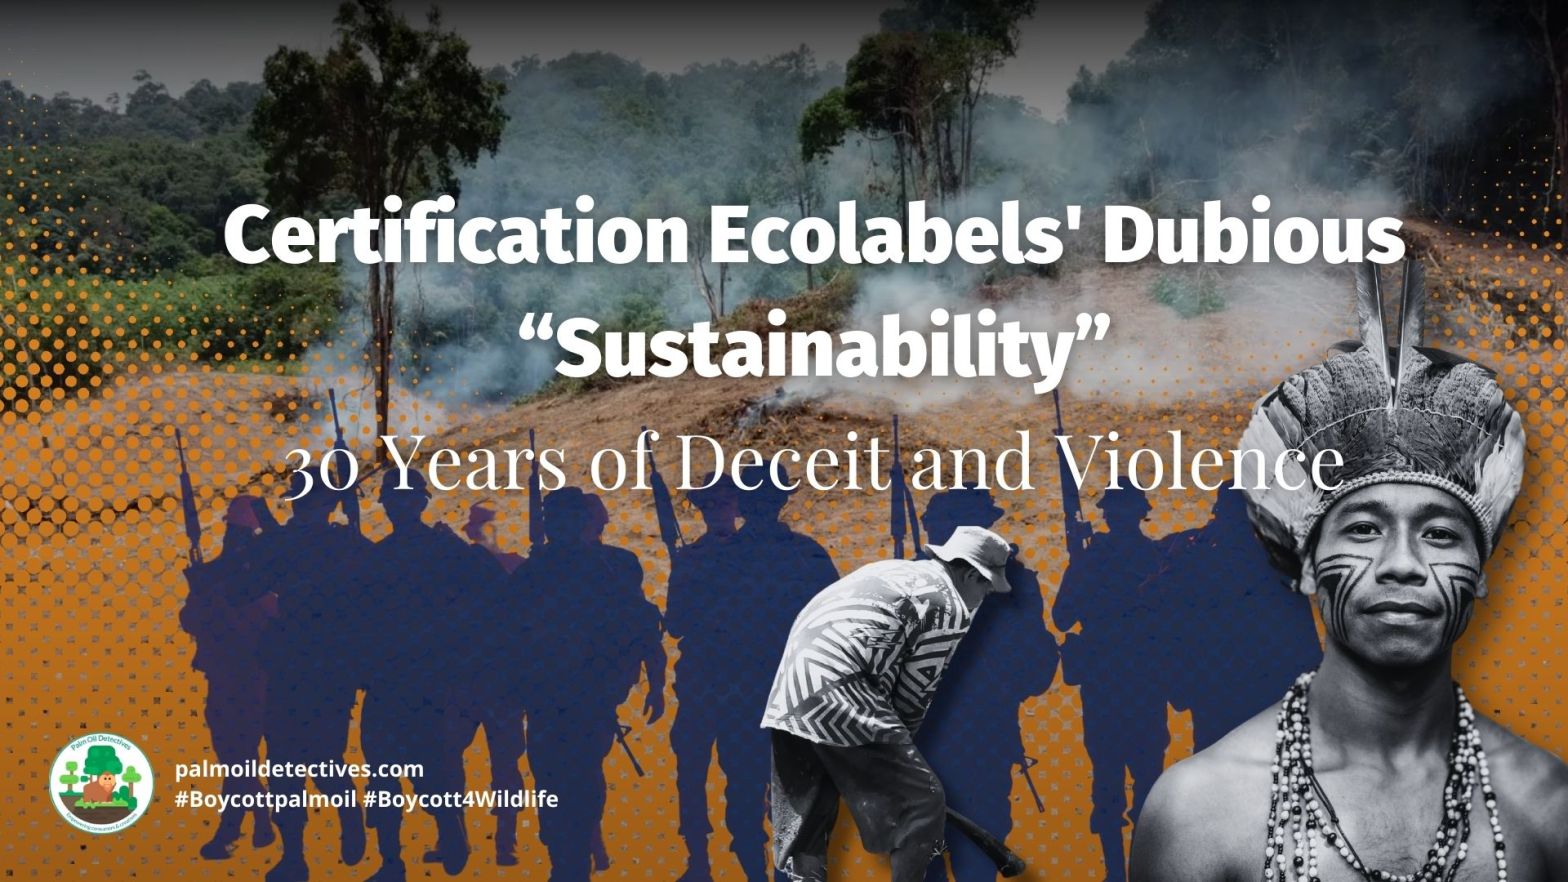 Certification Ecolabels' Dubious “Sustainability”: 30 Years of Deceit and Violence